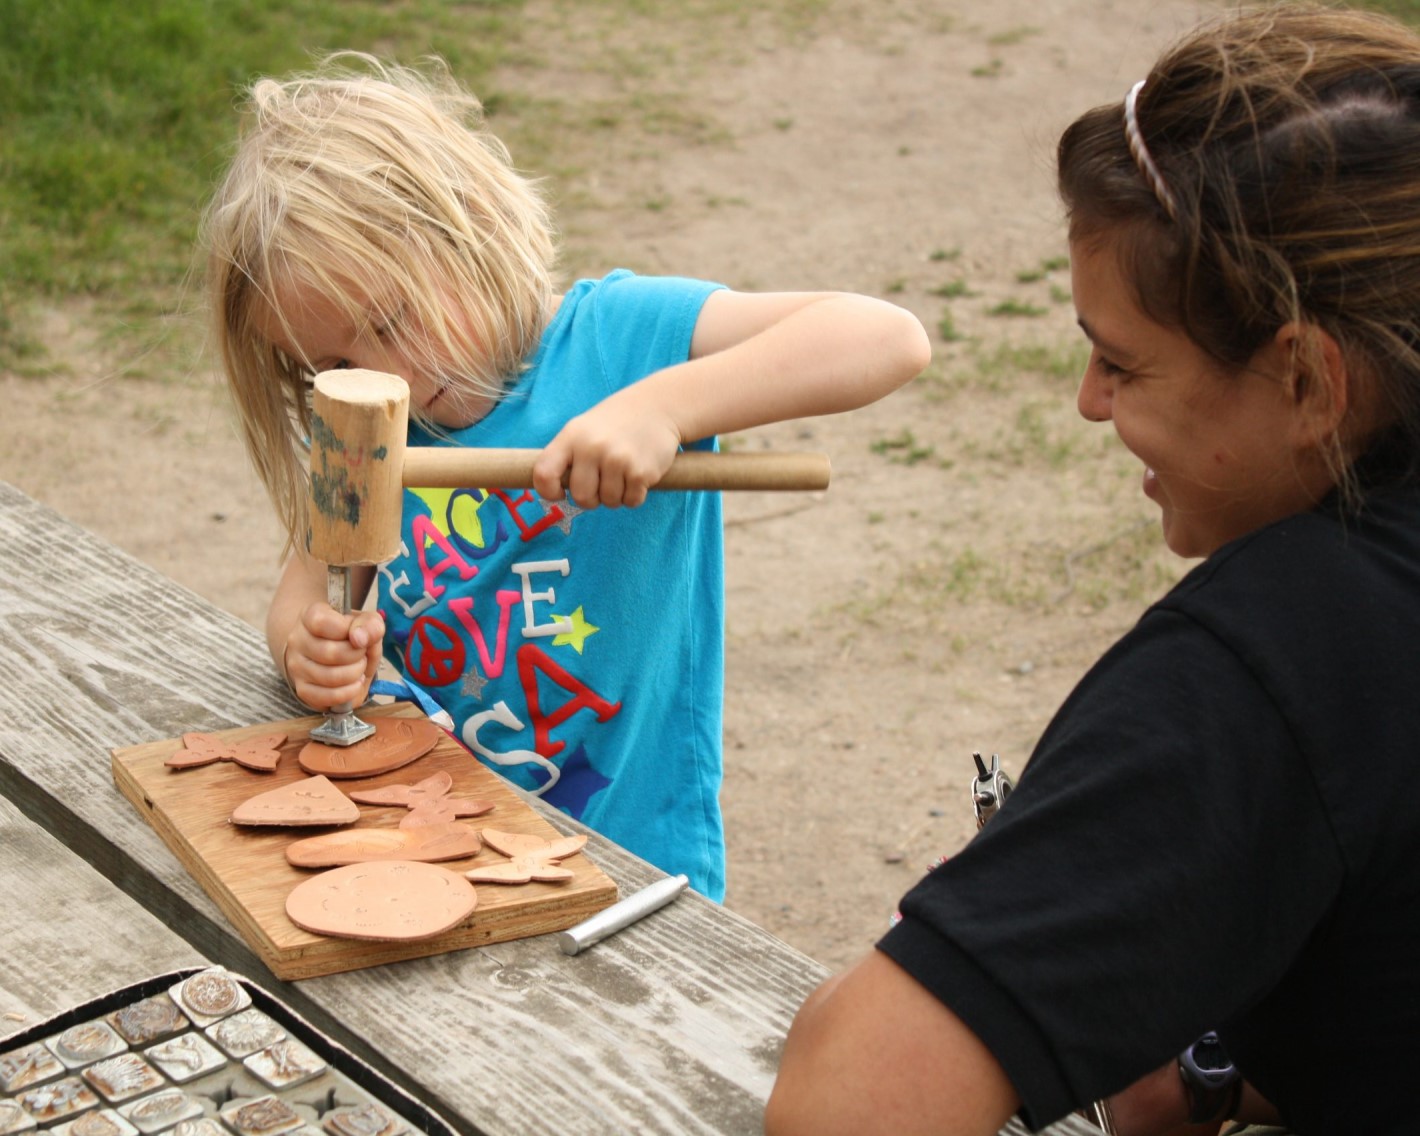 Family Camp participant hammering a stamp into leather